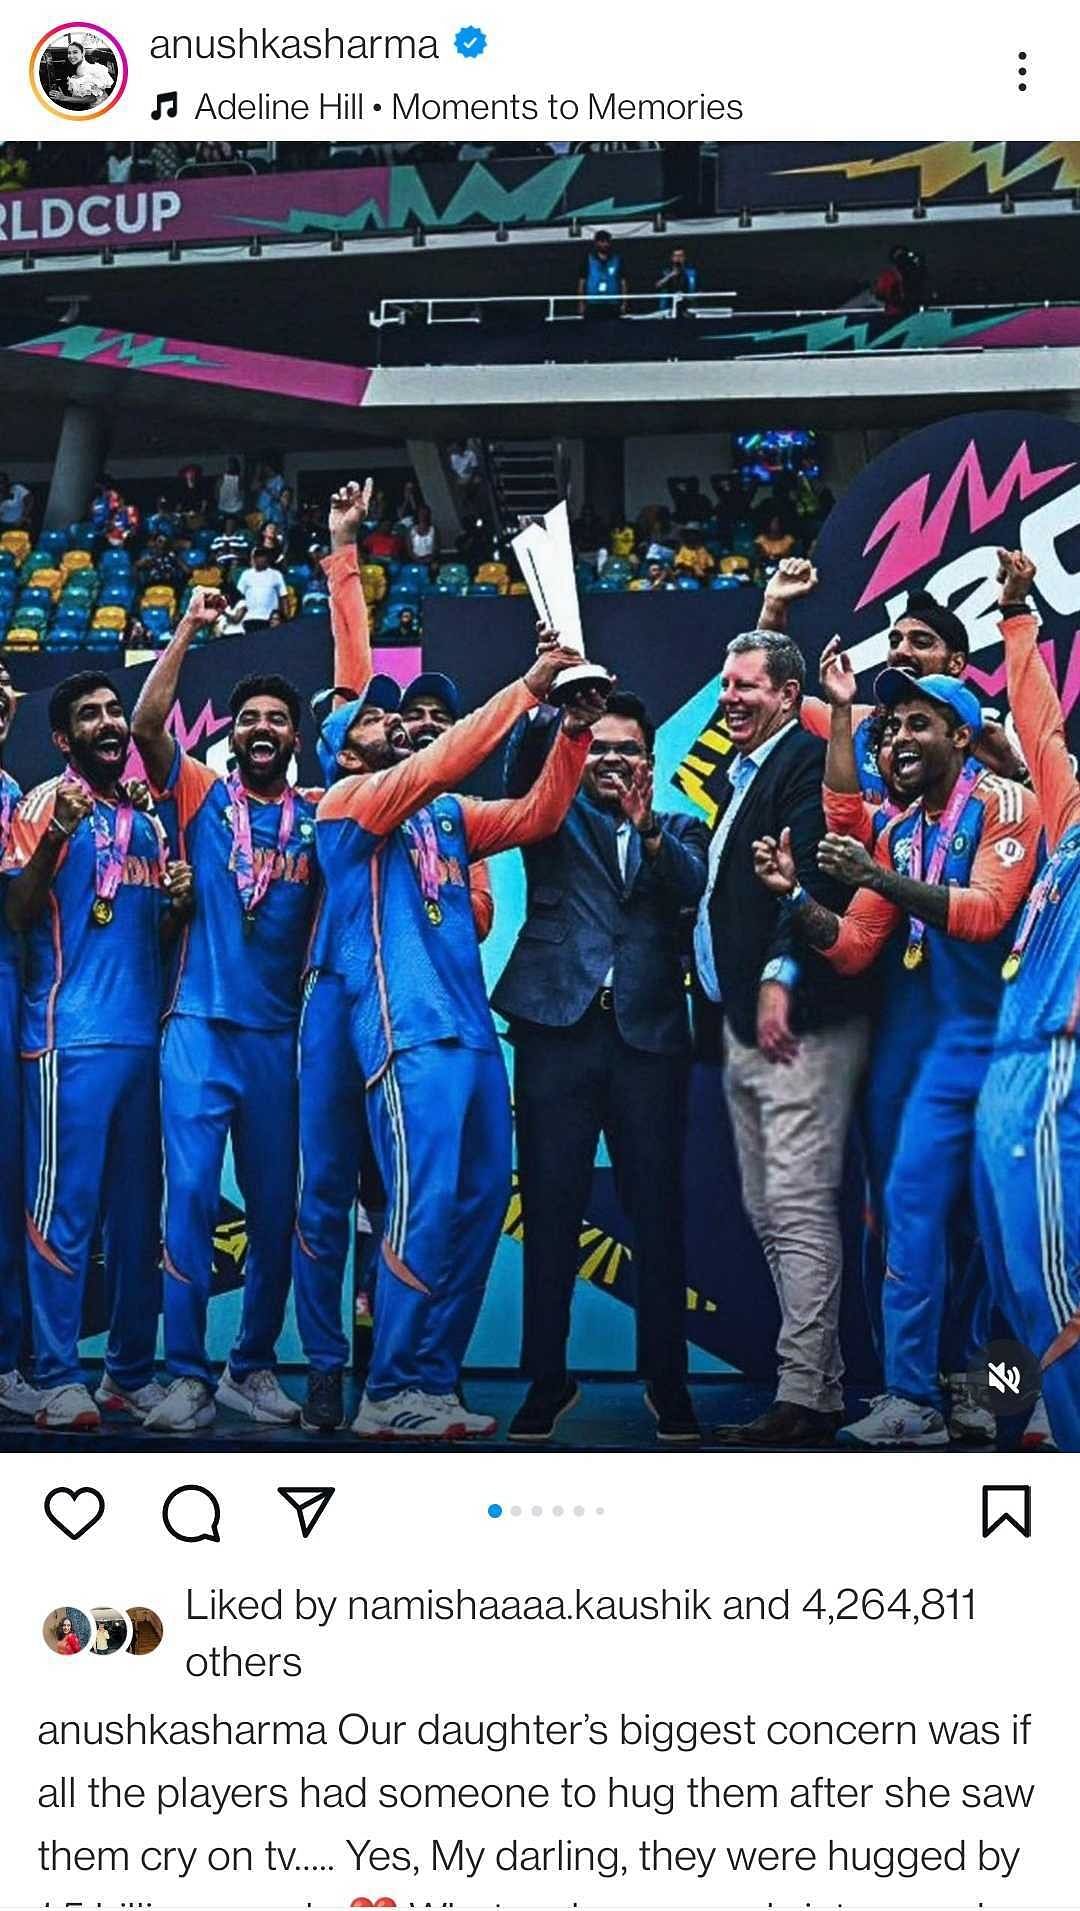 "Our daughter's biggest concern was if all the players had someone to hug them after she saw them cry on tv..... Yes, My darling, they were hugged by 1.5 billion people What a phenomenal victory and what a legendary achievement!! CHAMPIONS - CONGRATULATIONS!!" wrote Anushka Sharma on her Instagram post as she shared a picture of the team celebrating their victory.